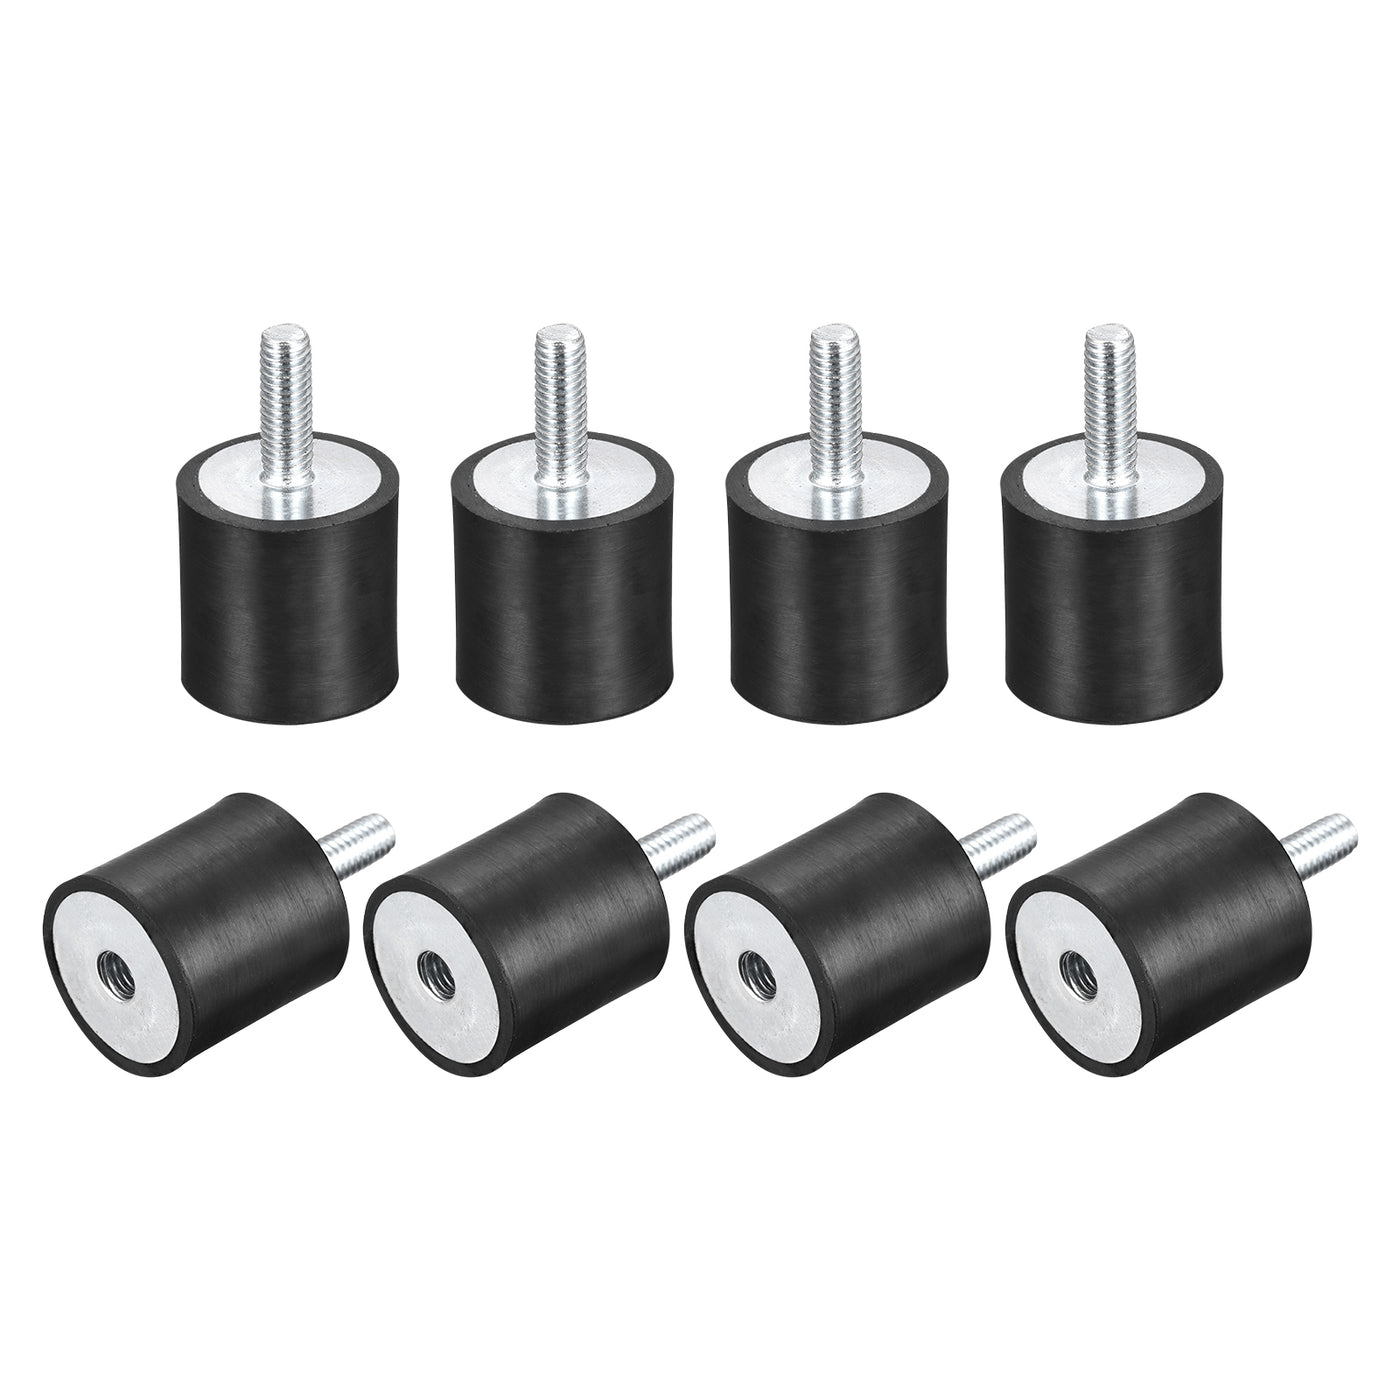 uxcell Uxcell Rubber Mounts 8pcs M6 Male/Female Vibration Isolator Shock Absorber D25mmxH25mm